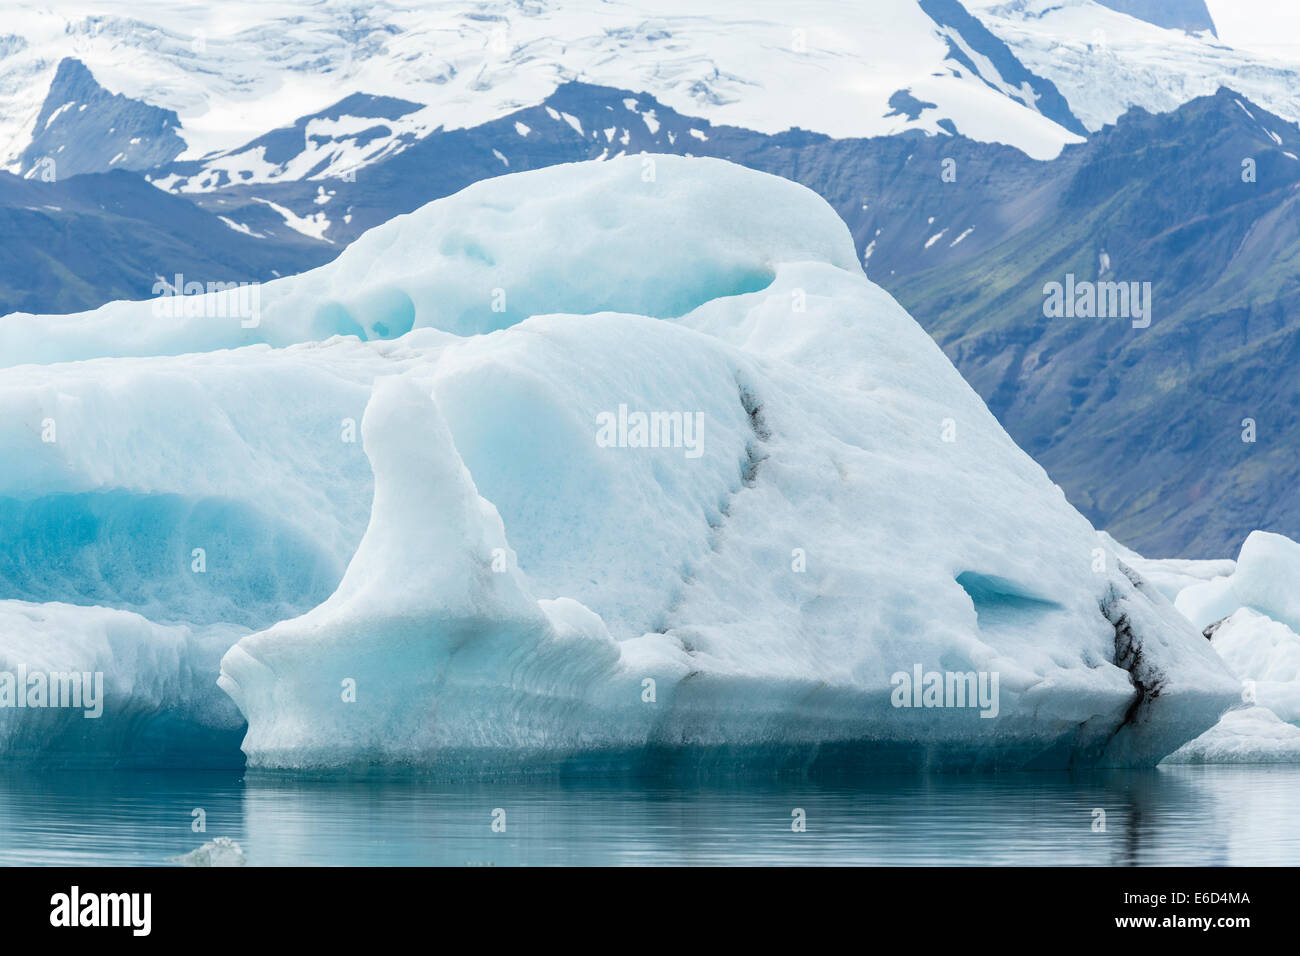 View of one of the icebergs in the Jökulsárlón glacial lagoon in southeastern Iceland. Stock Photo